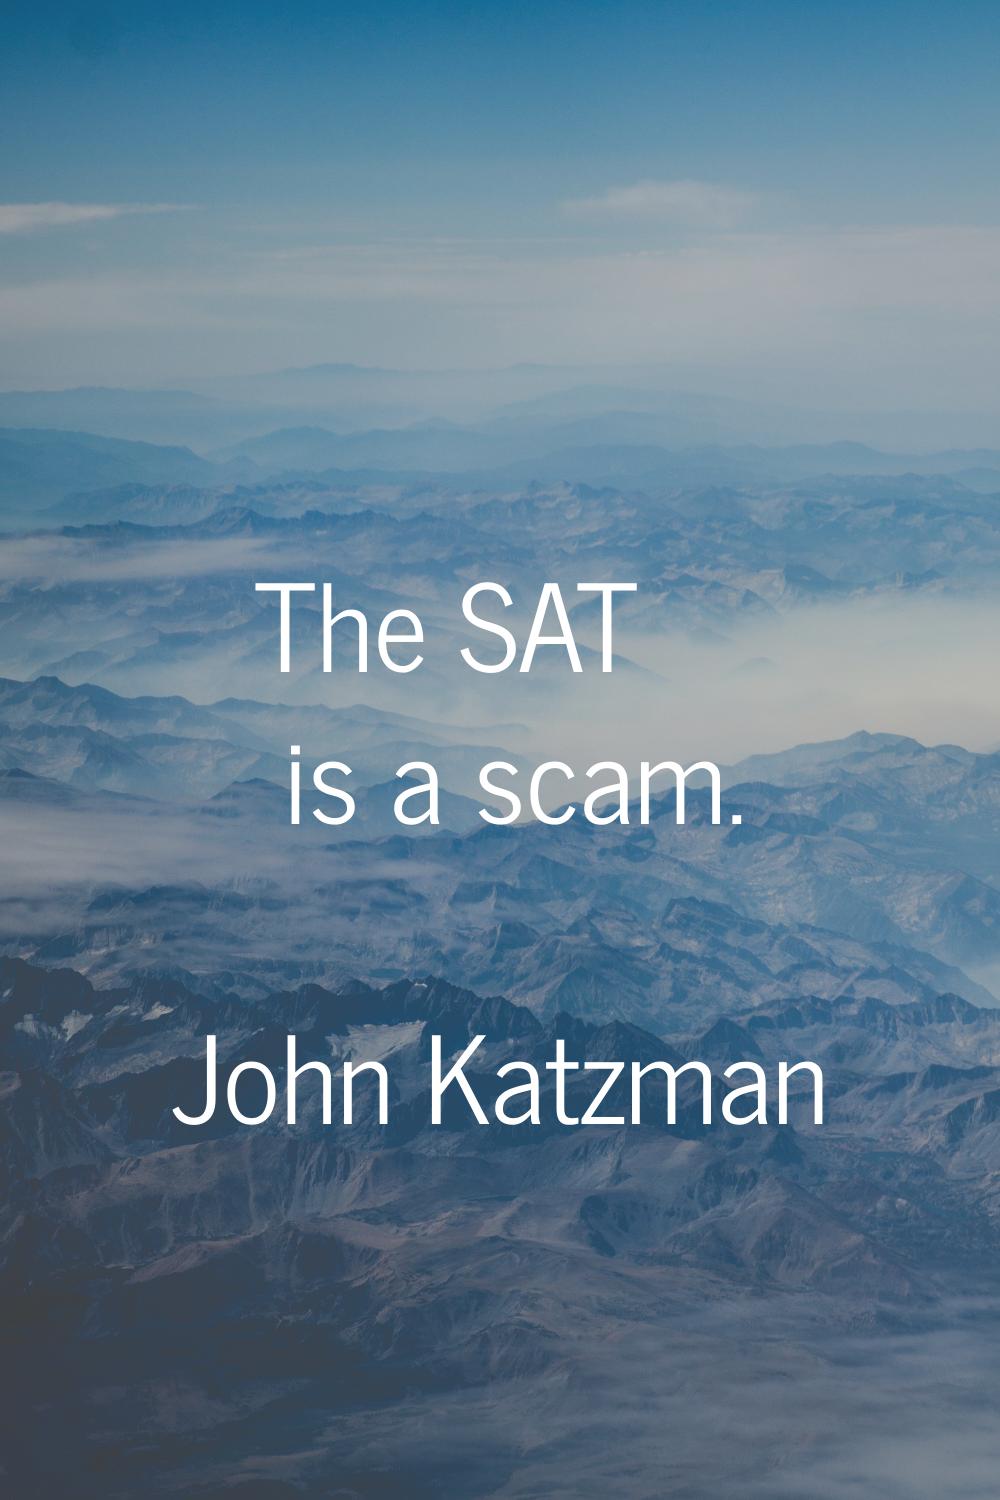 The SAT is a scam.